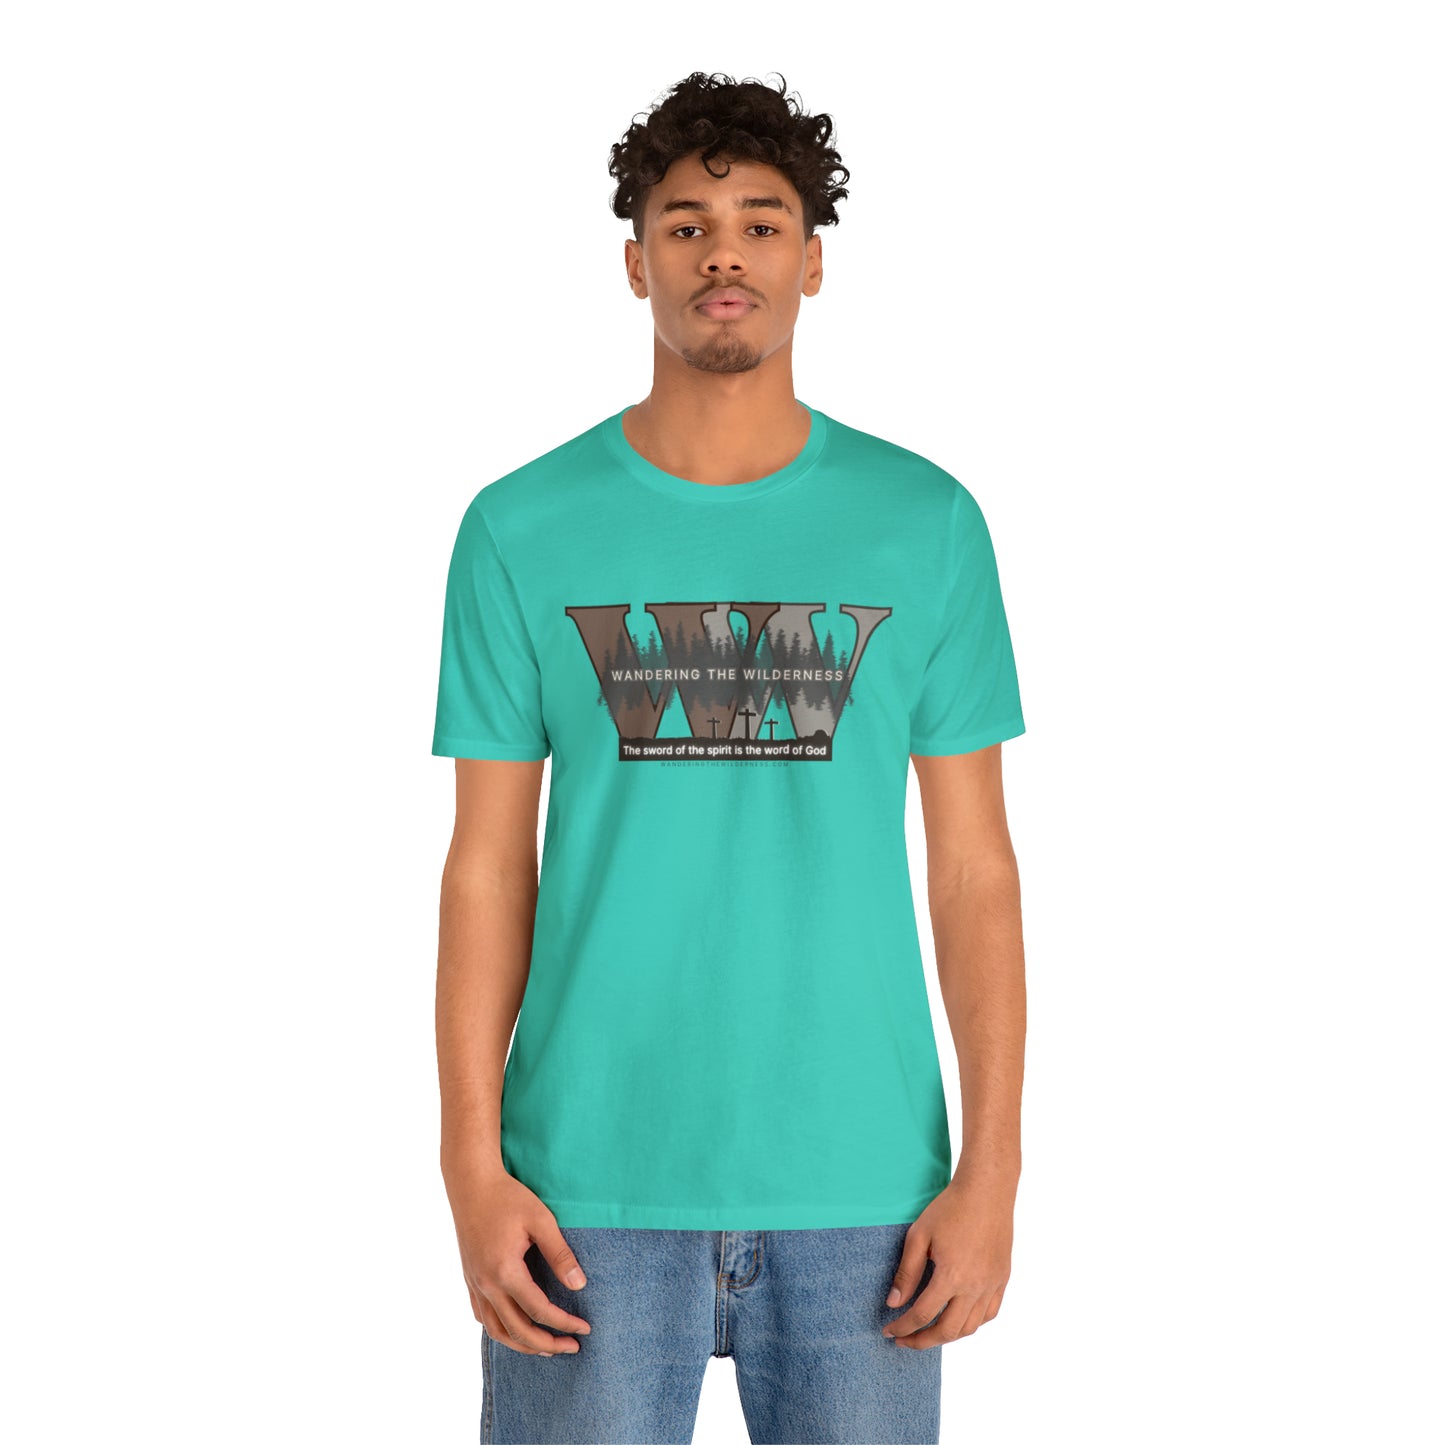 Wandering the Wilderness big logo athletic fit short sleeve t-shirt.